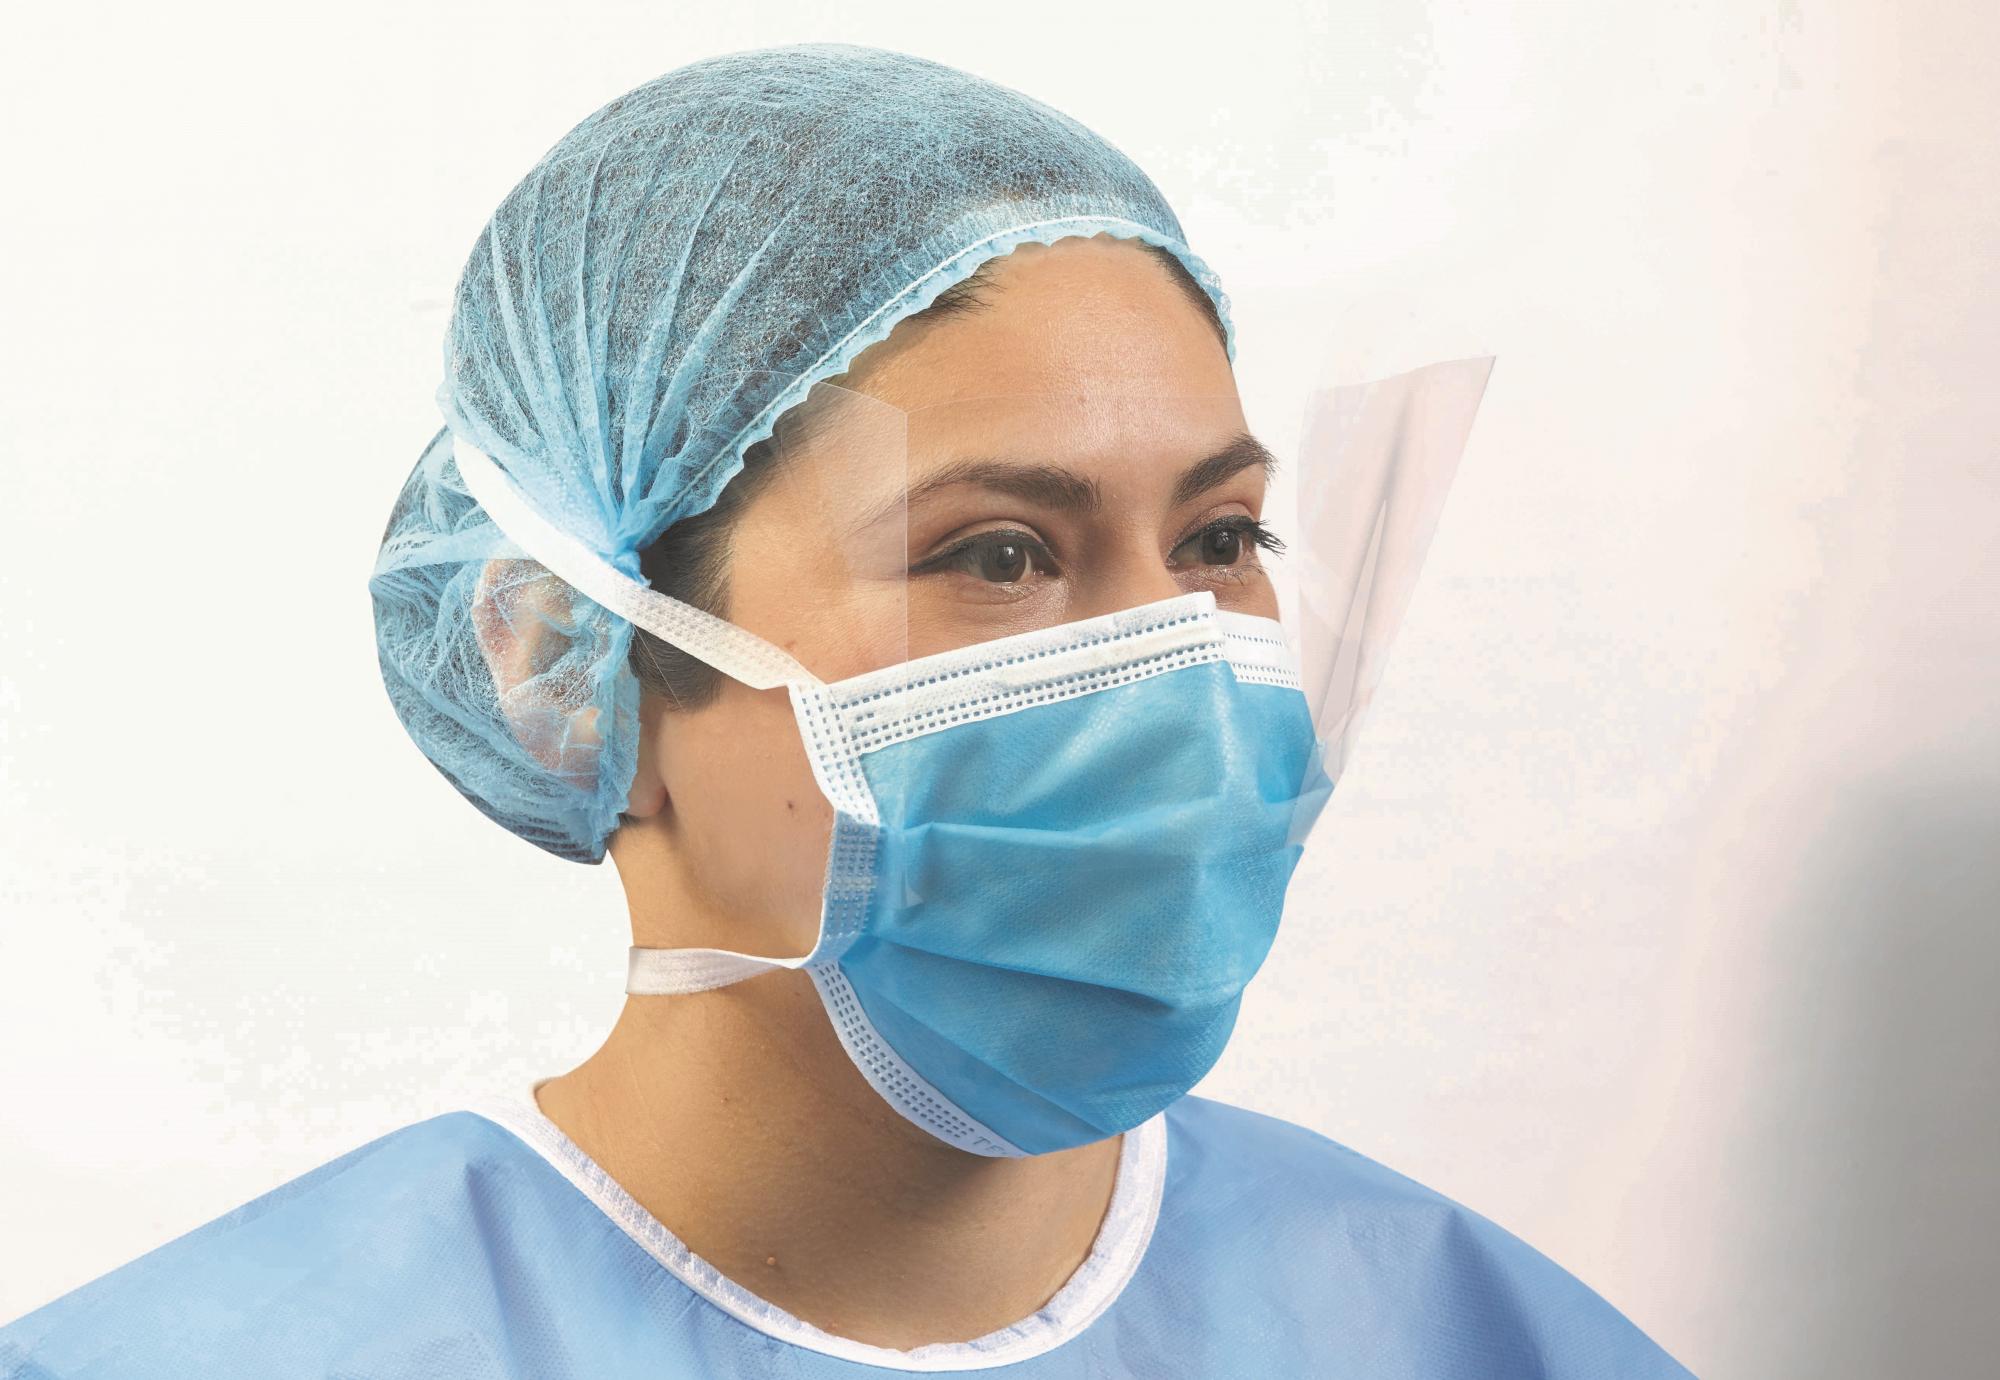 Health professional wearing a face mask